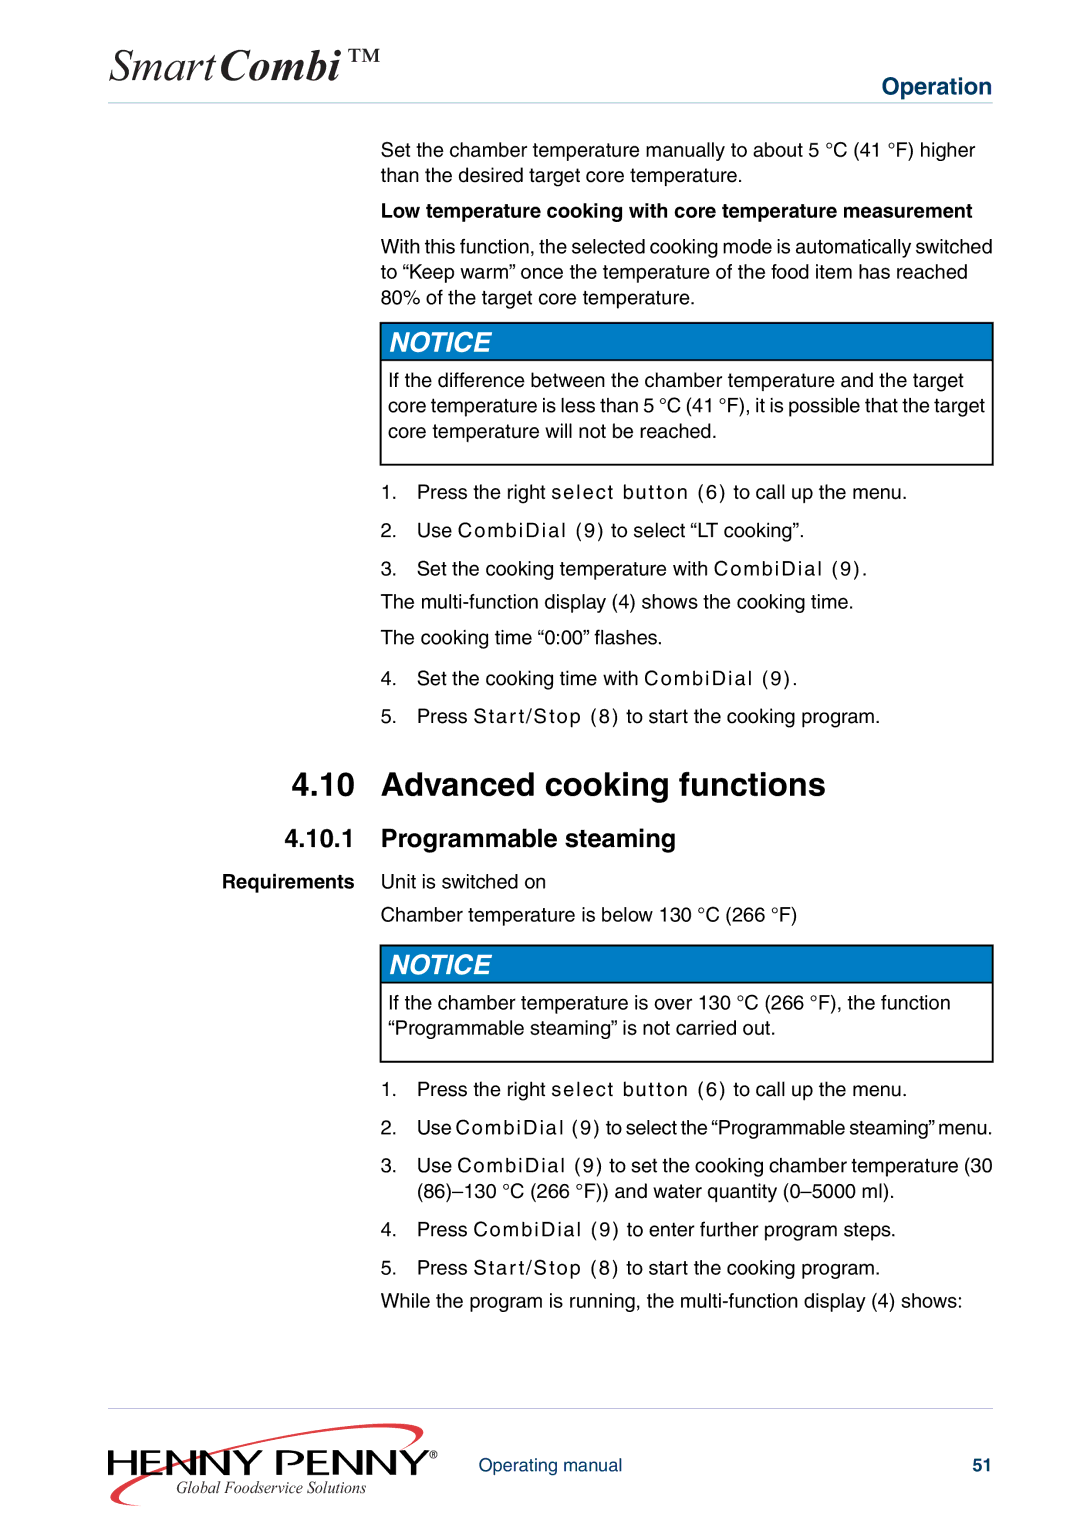 Henny Penny FM05-061-A manual Advanced cooking functions, Low temperature cooking with core temperature measurement 